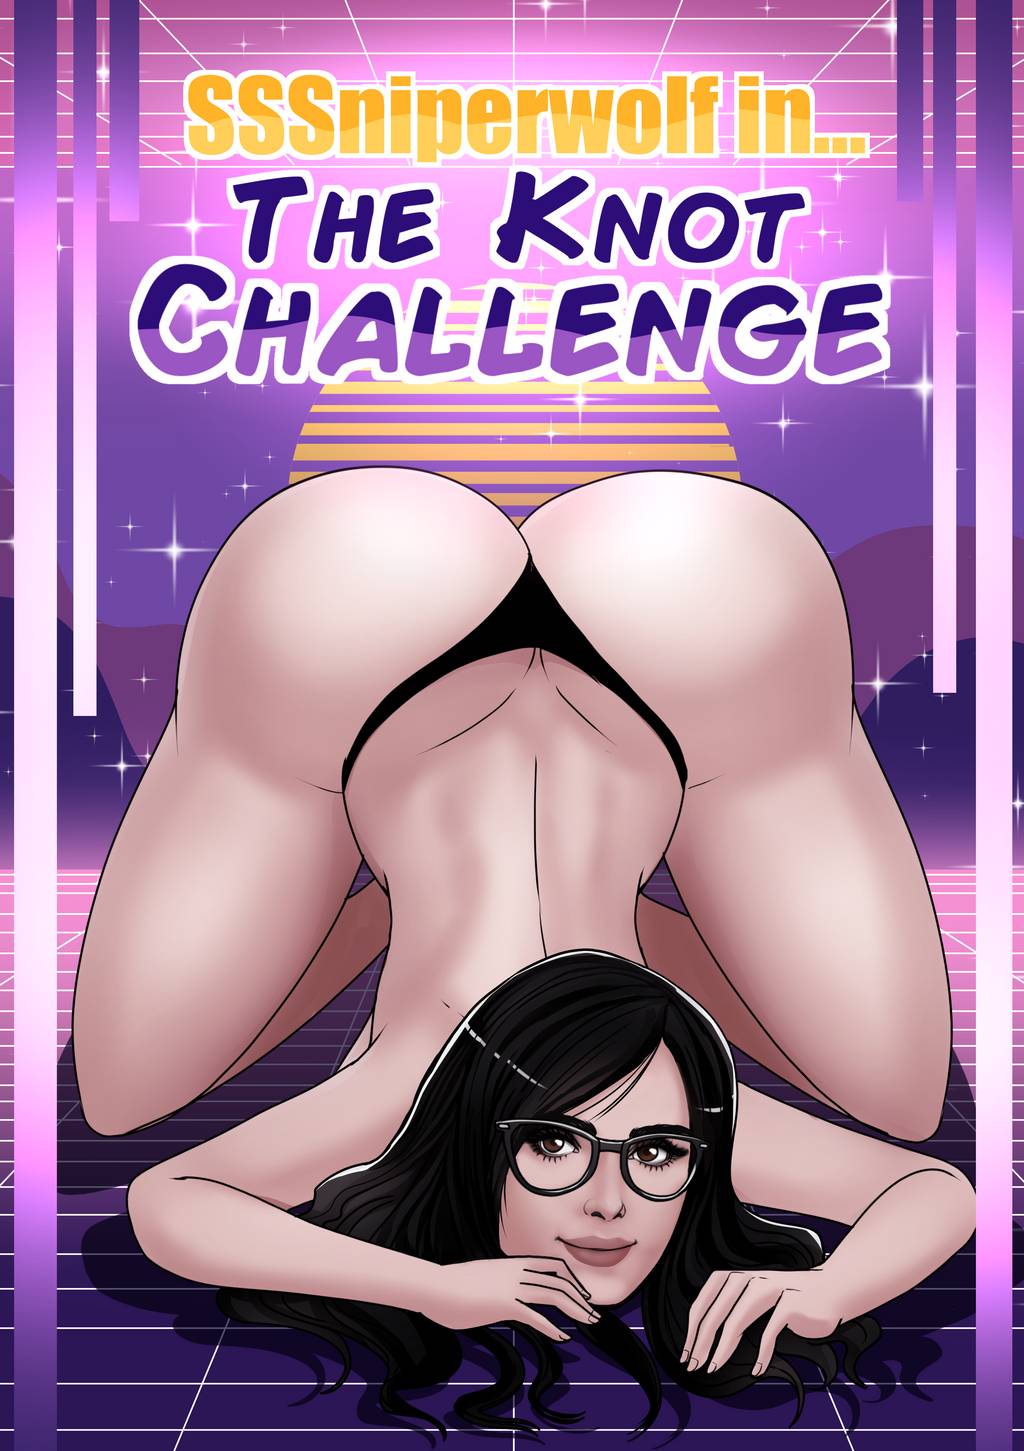 Sssniperwolf the knot challenge